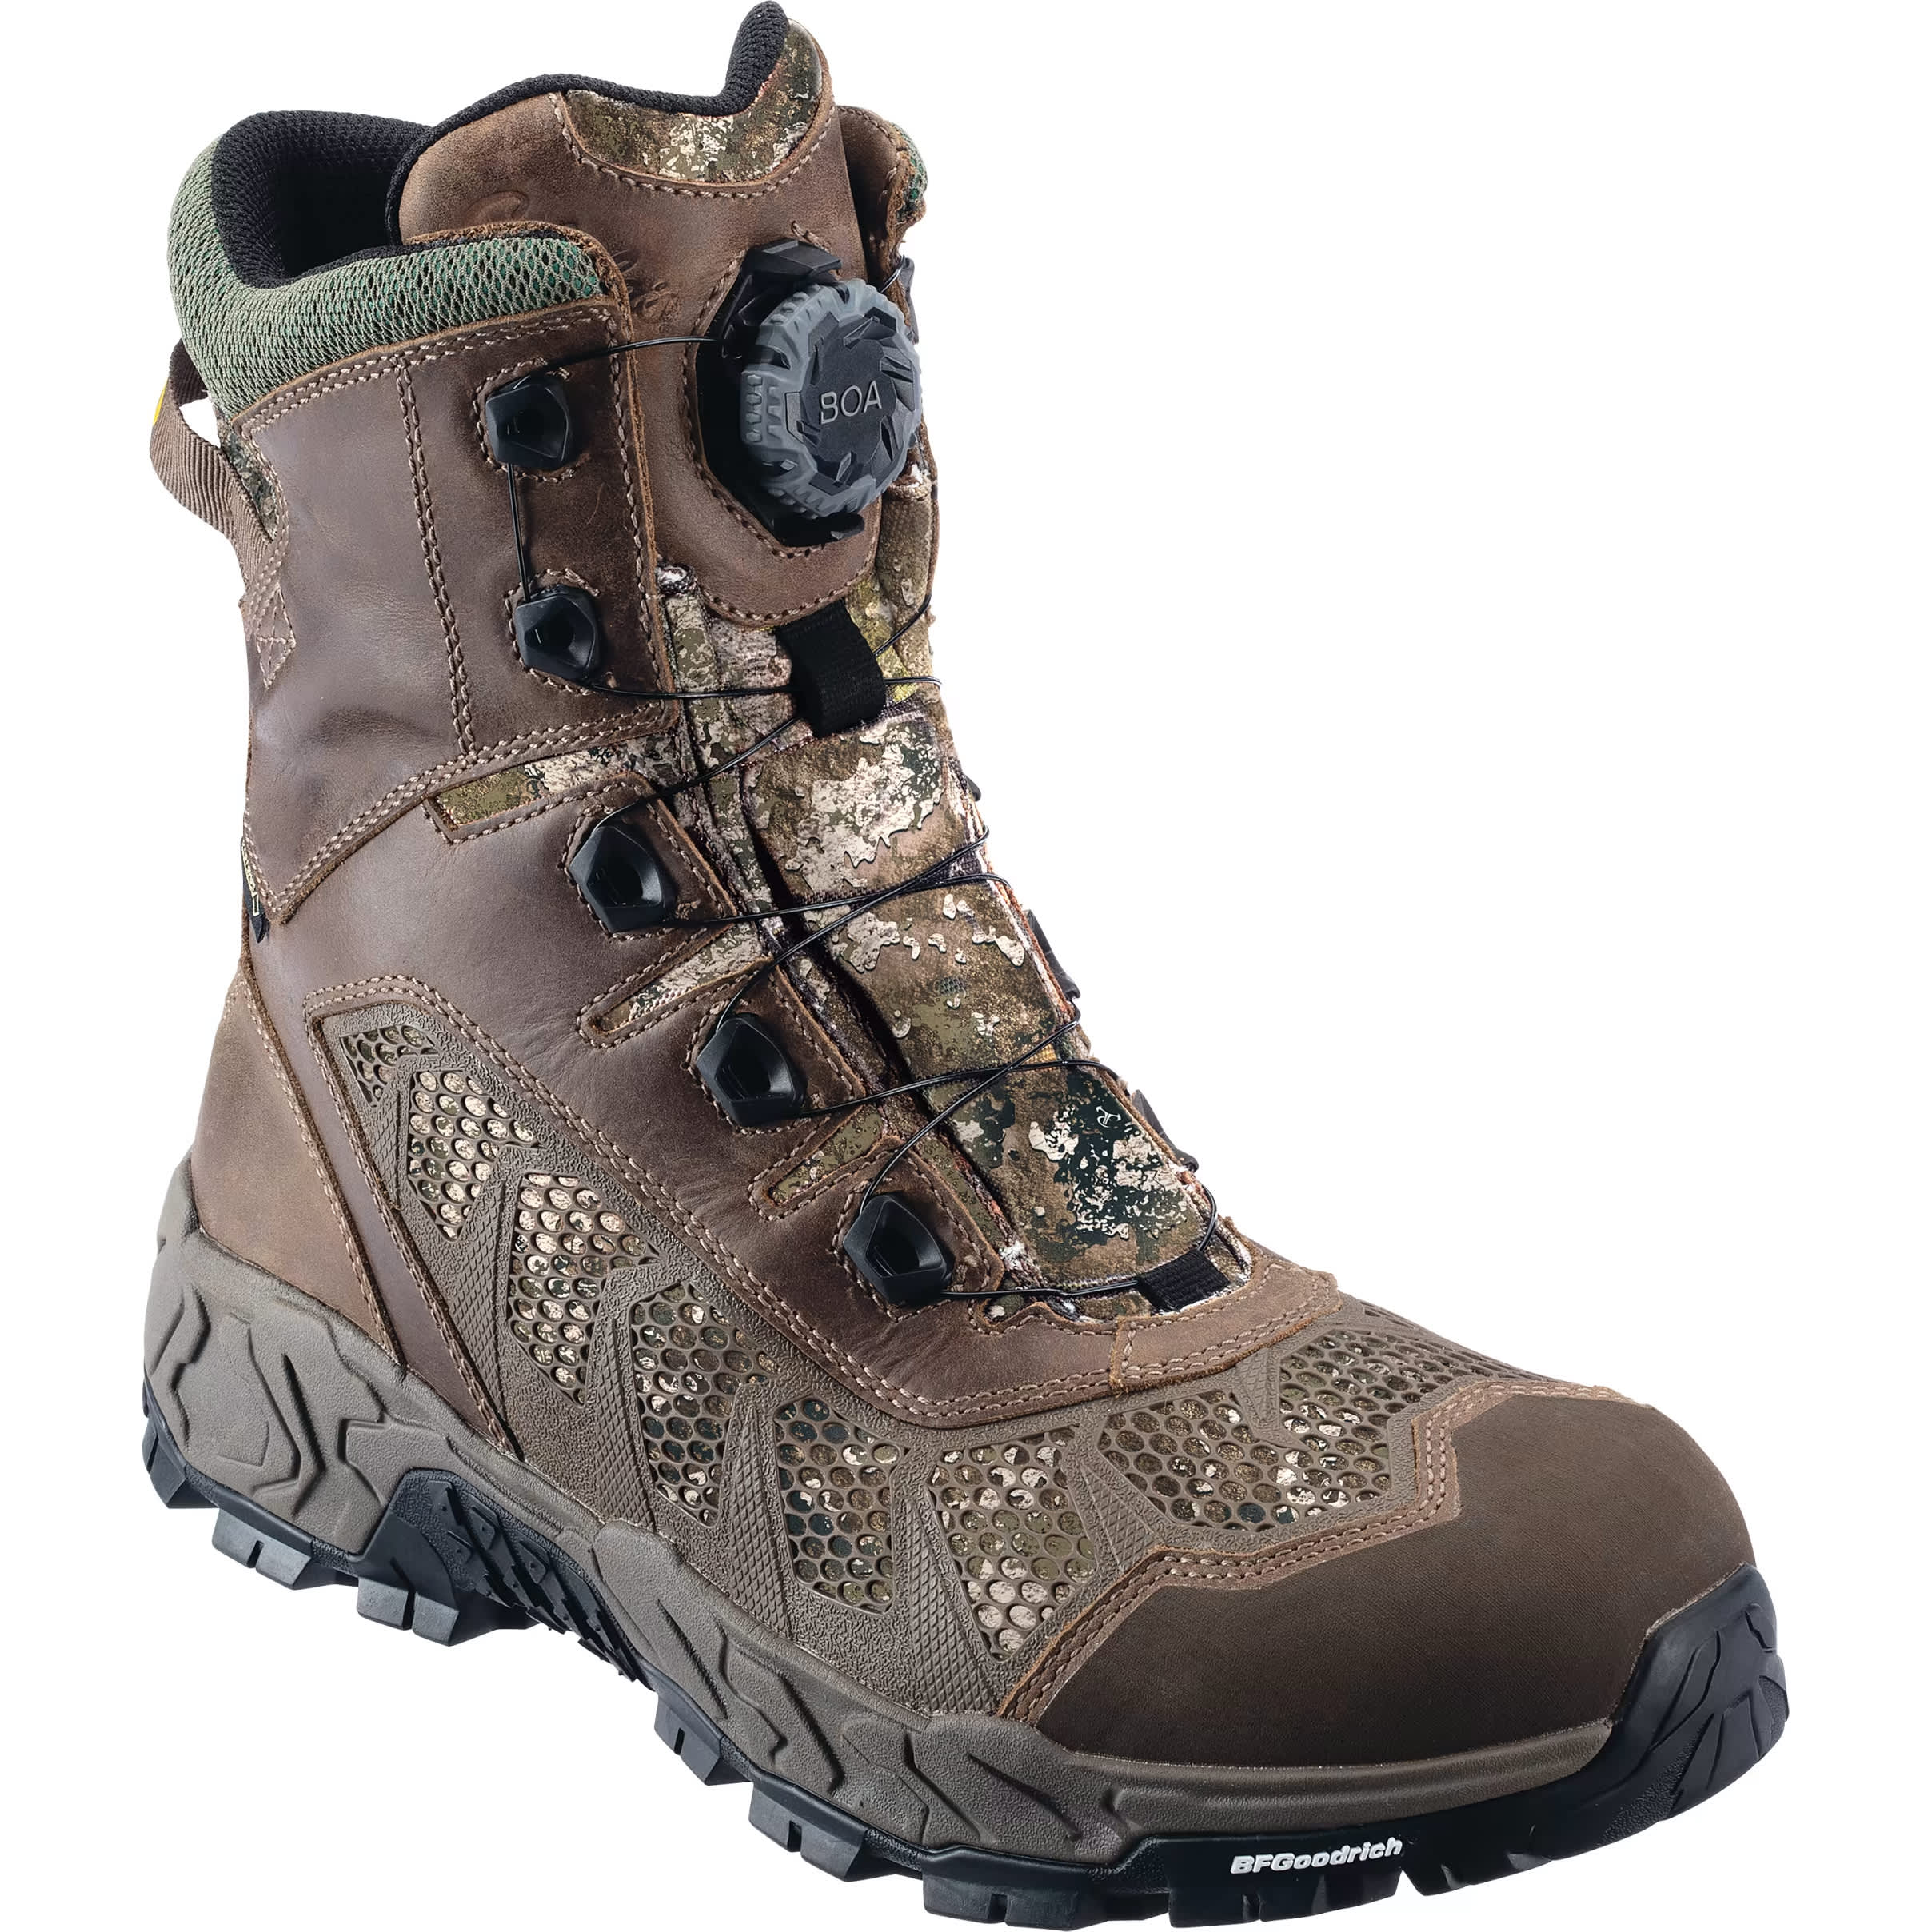 Cabela’s Men’s Treadfast BOA® GORE-TEX® Insulated Hunting Boots